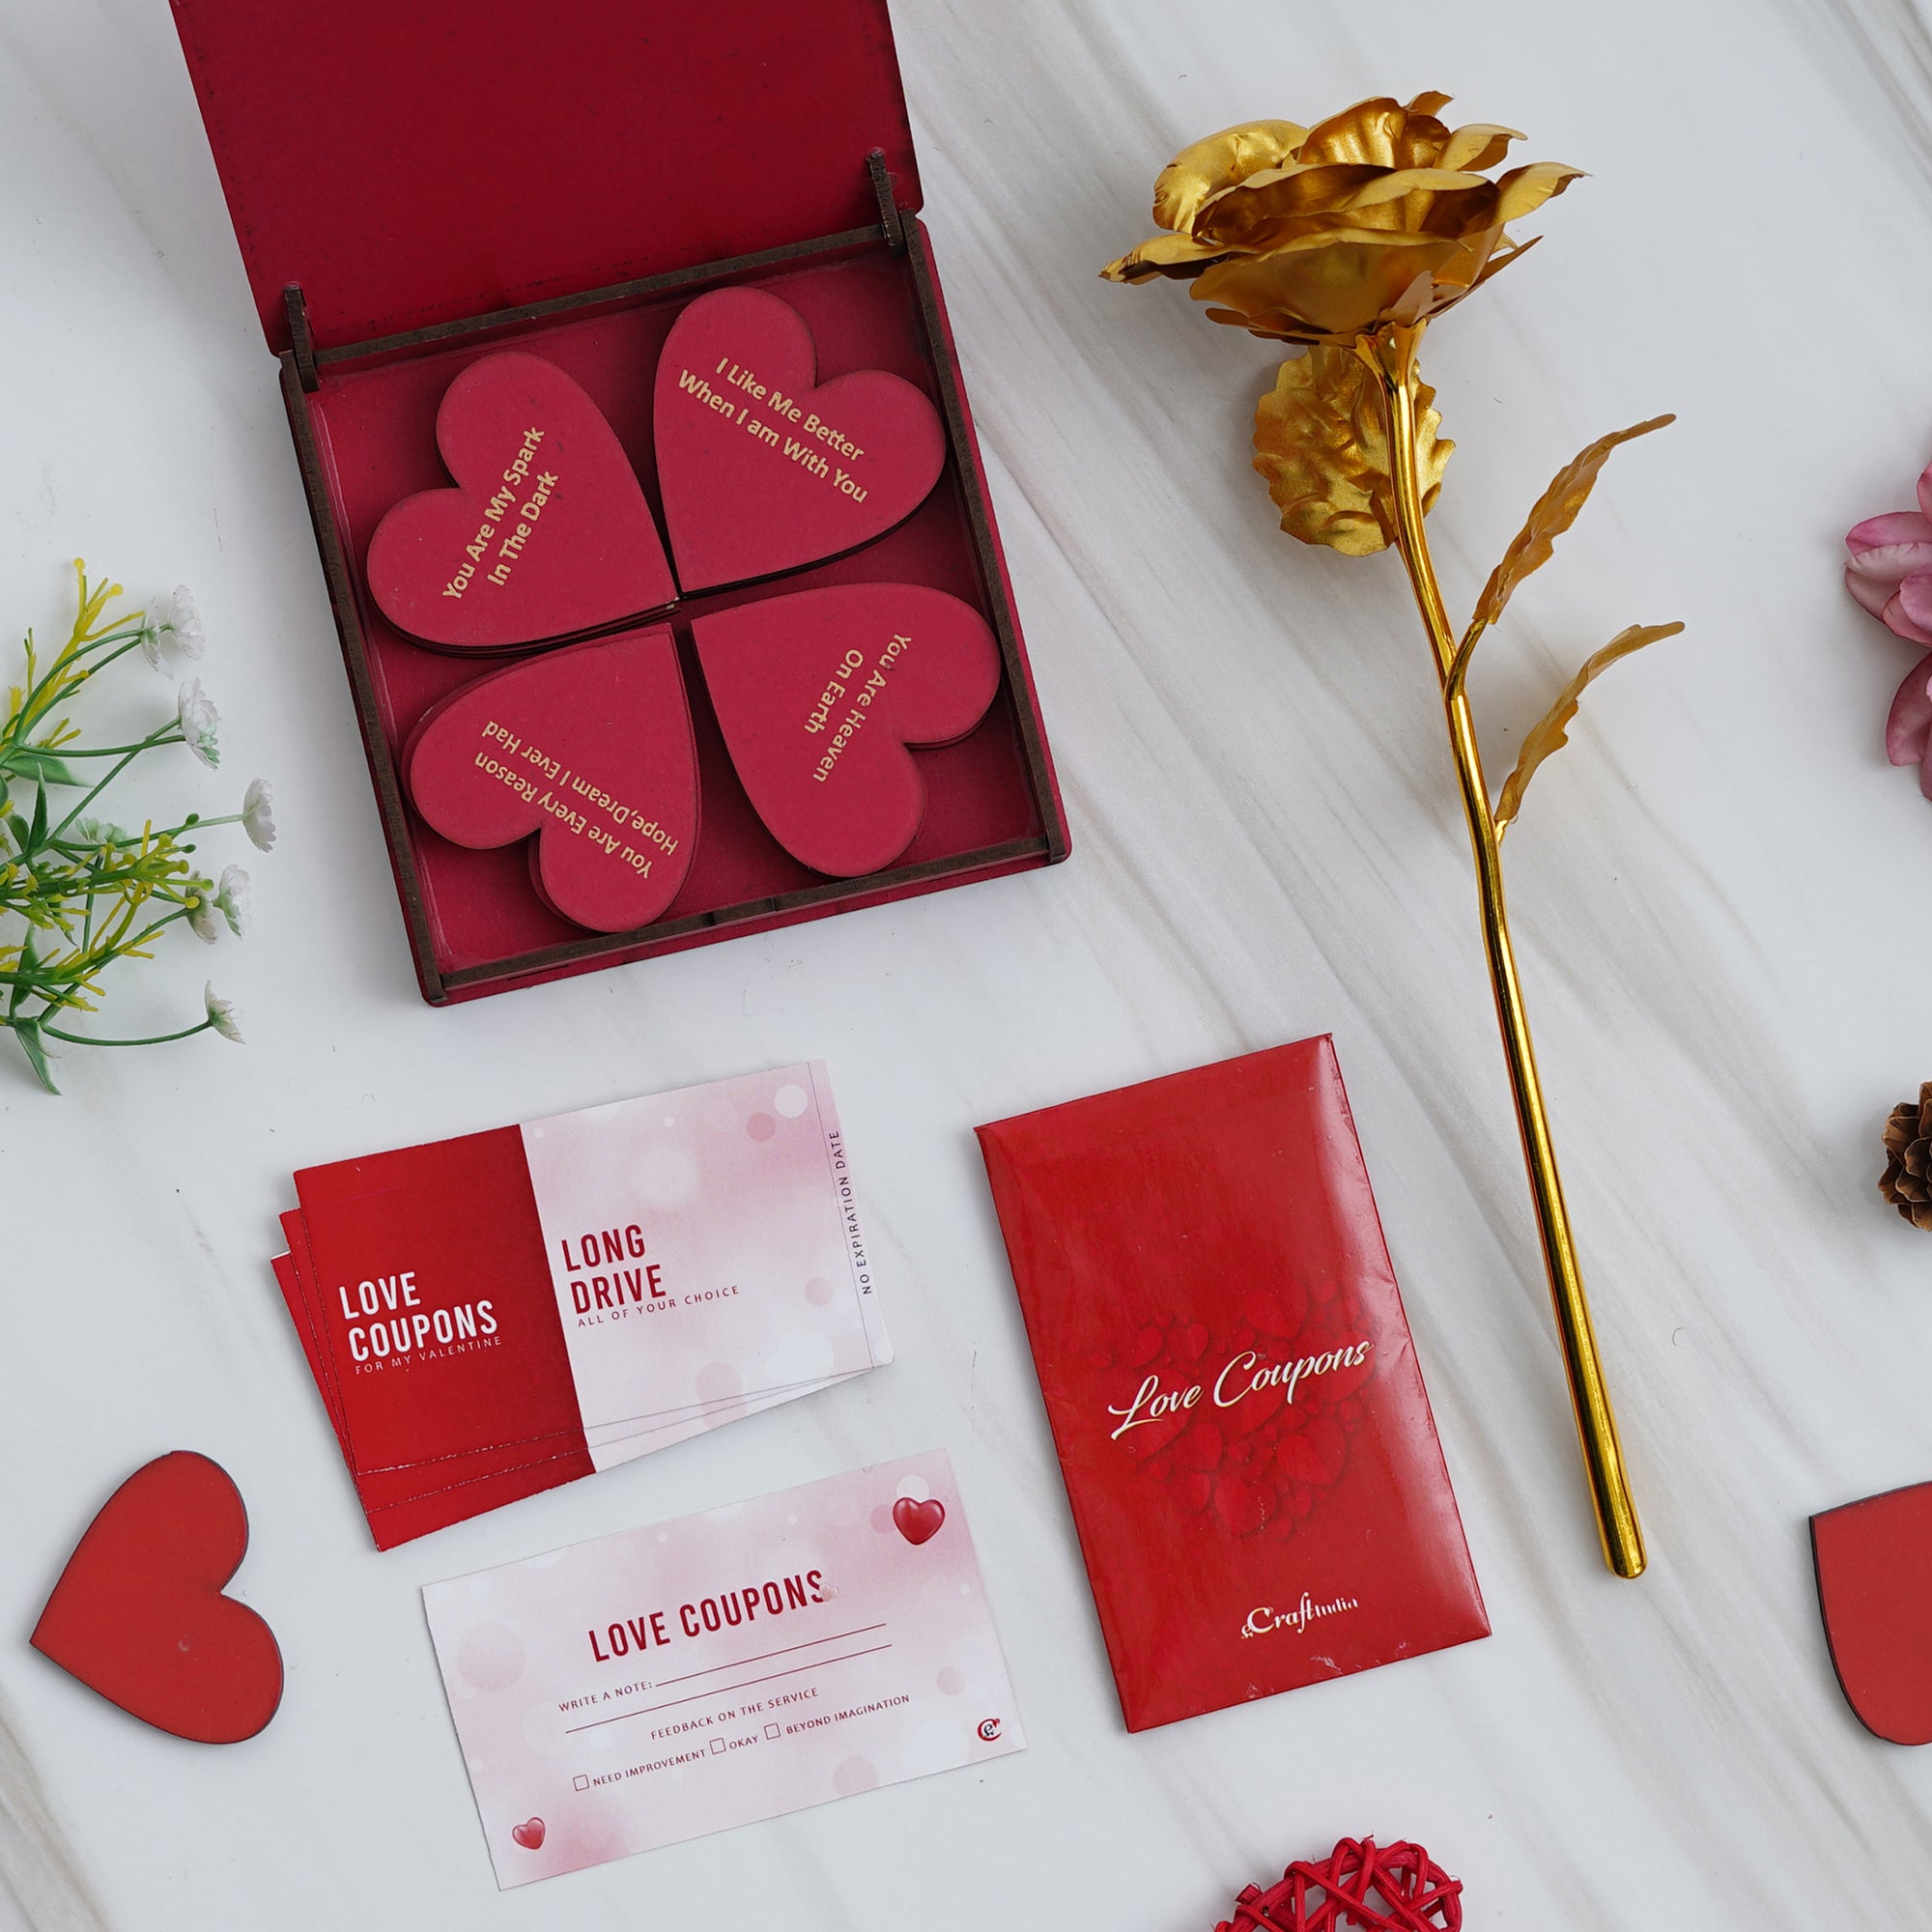 Valentine Combo of Pack of 12 Love Coupons Gift Cards Set, Golden Rose Gift Set, "20 Reasons Why I Love You" Printed on Little Red Hearts Decorative Wooden Gift Set Box